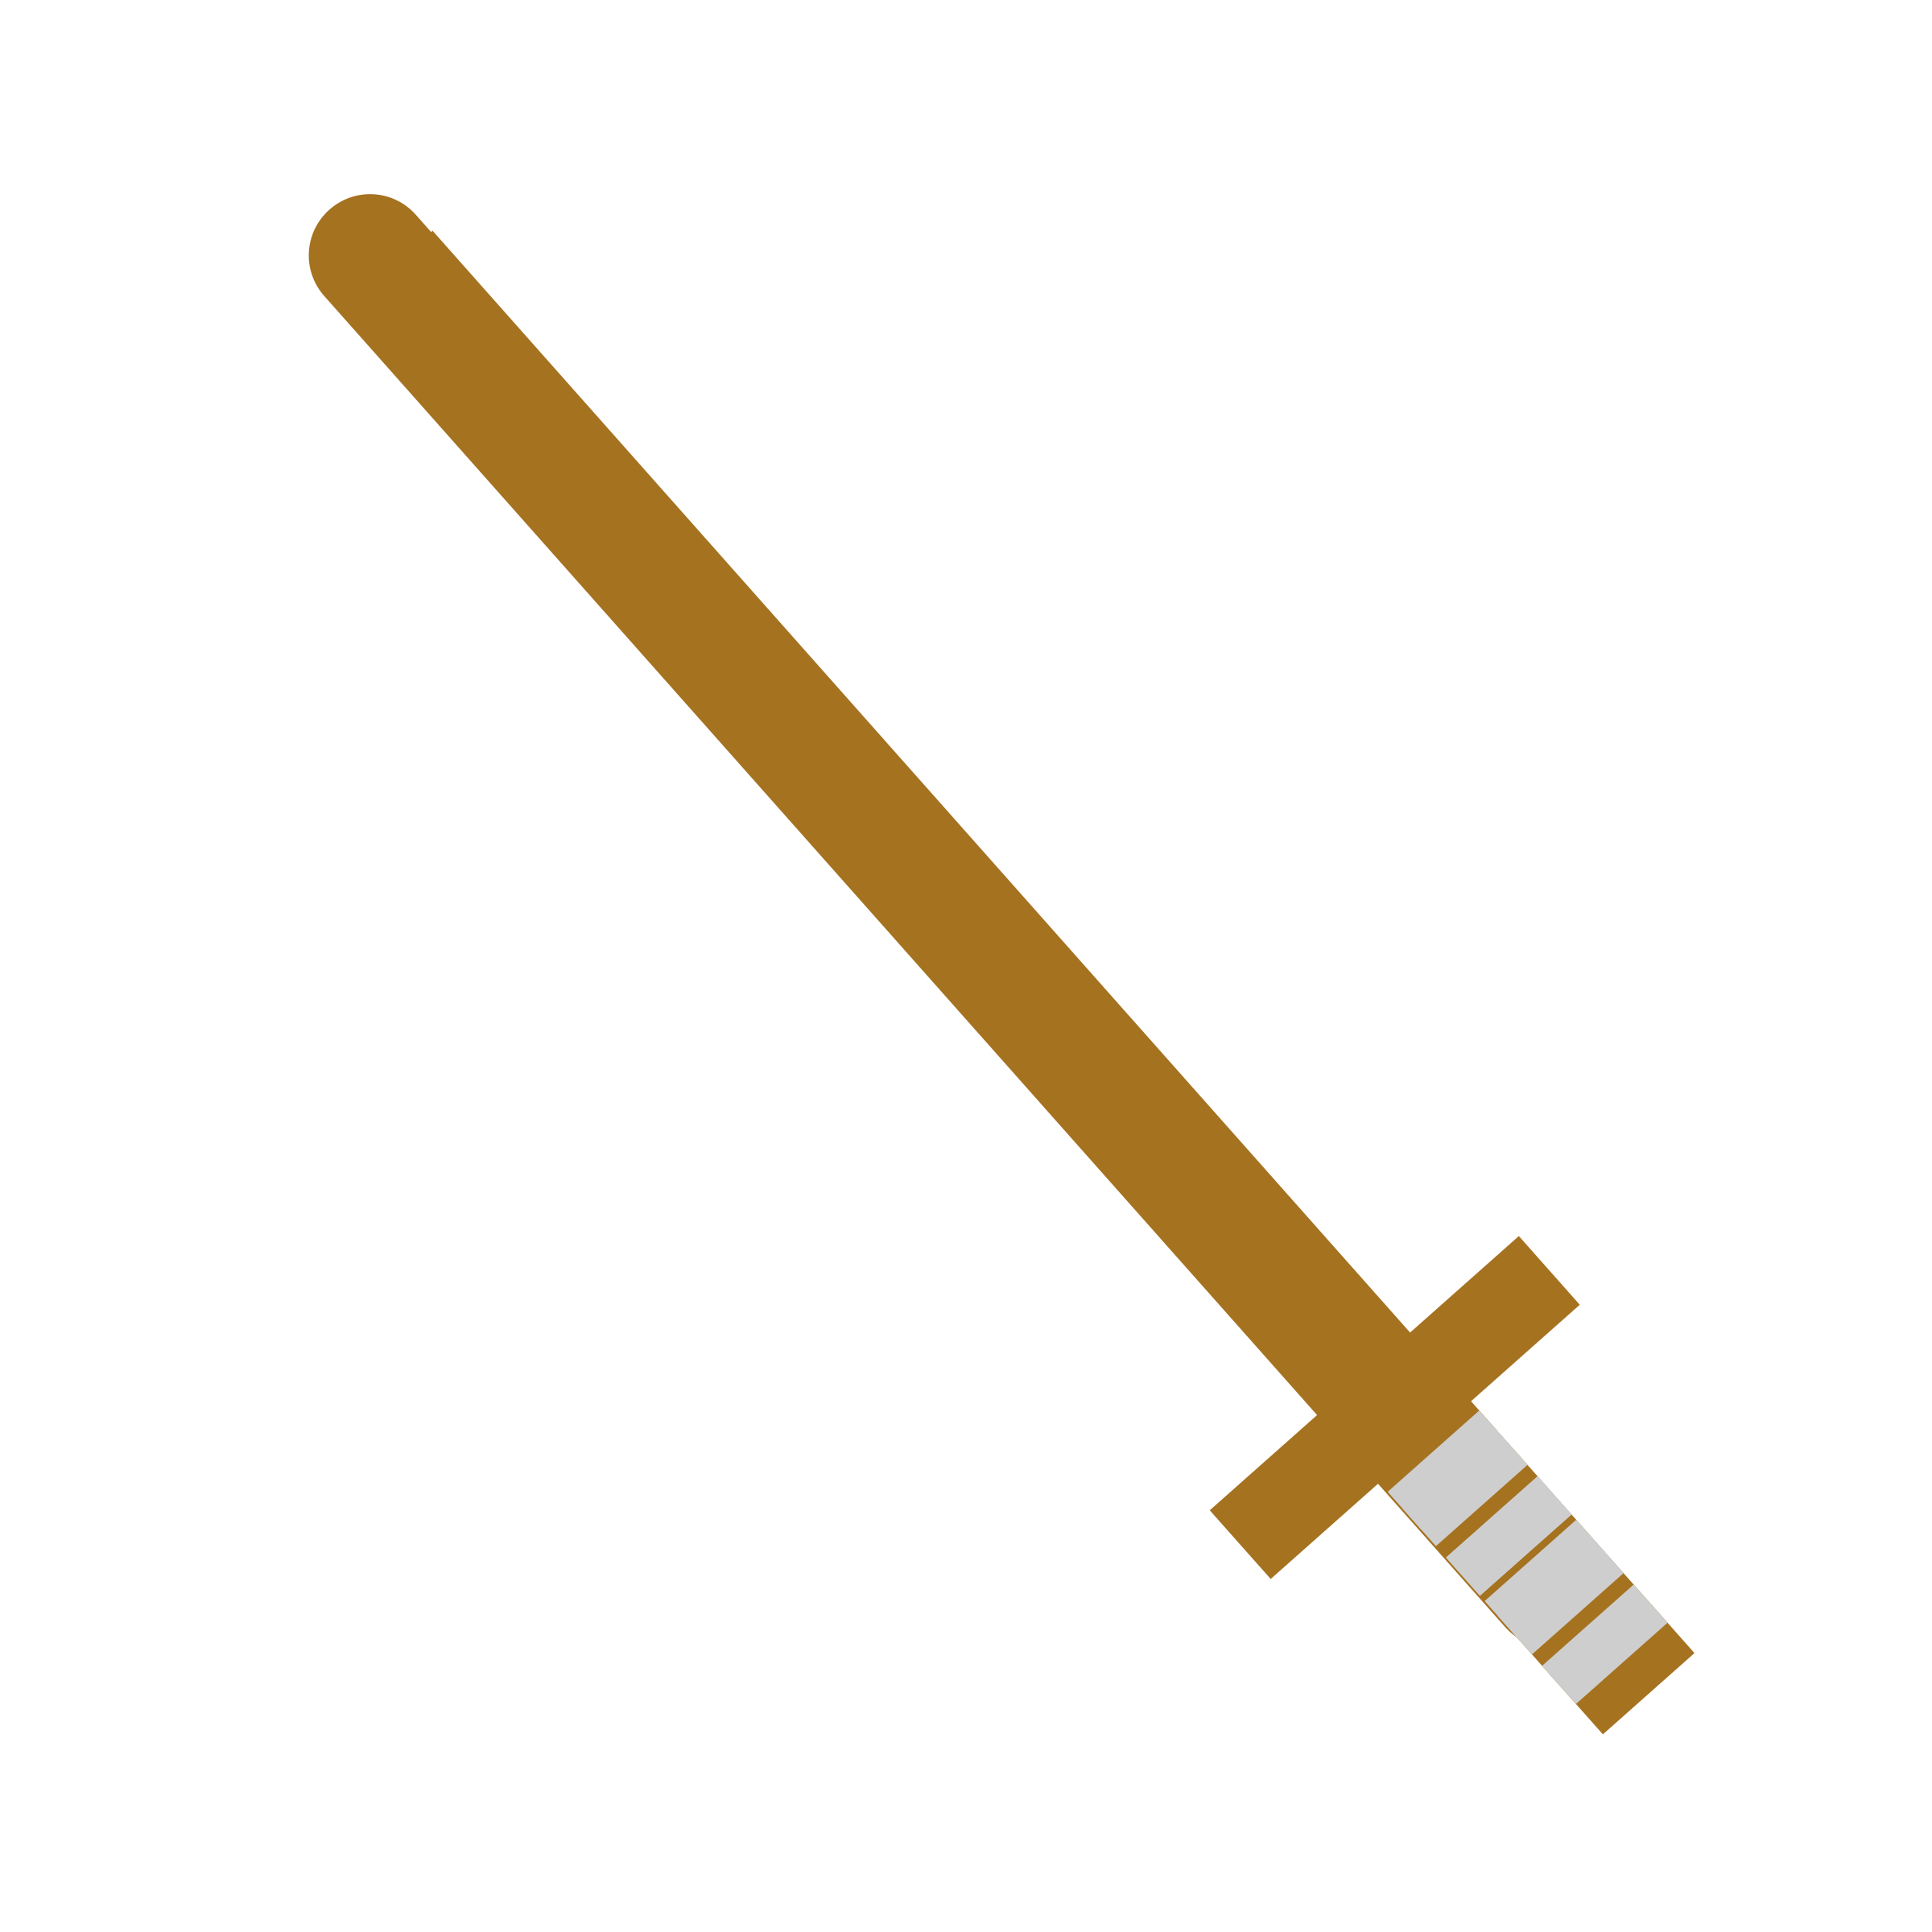 Wooden big image png. Clipart sword training